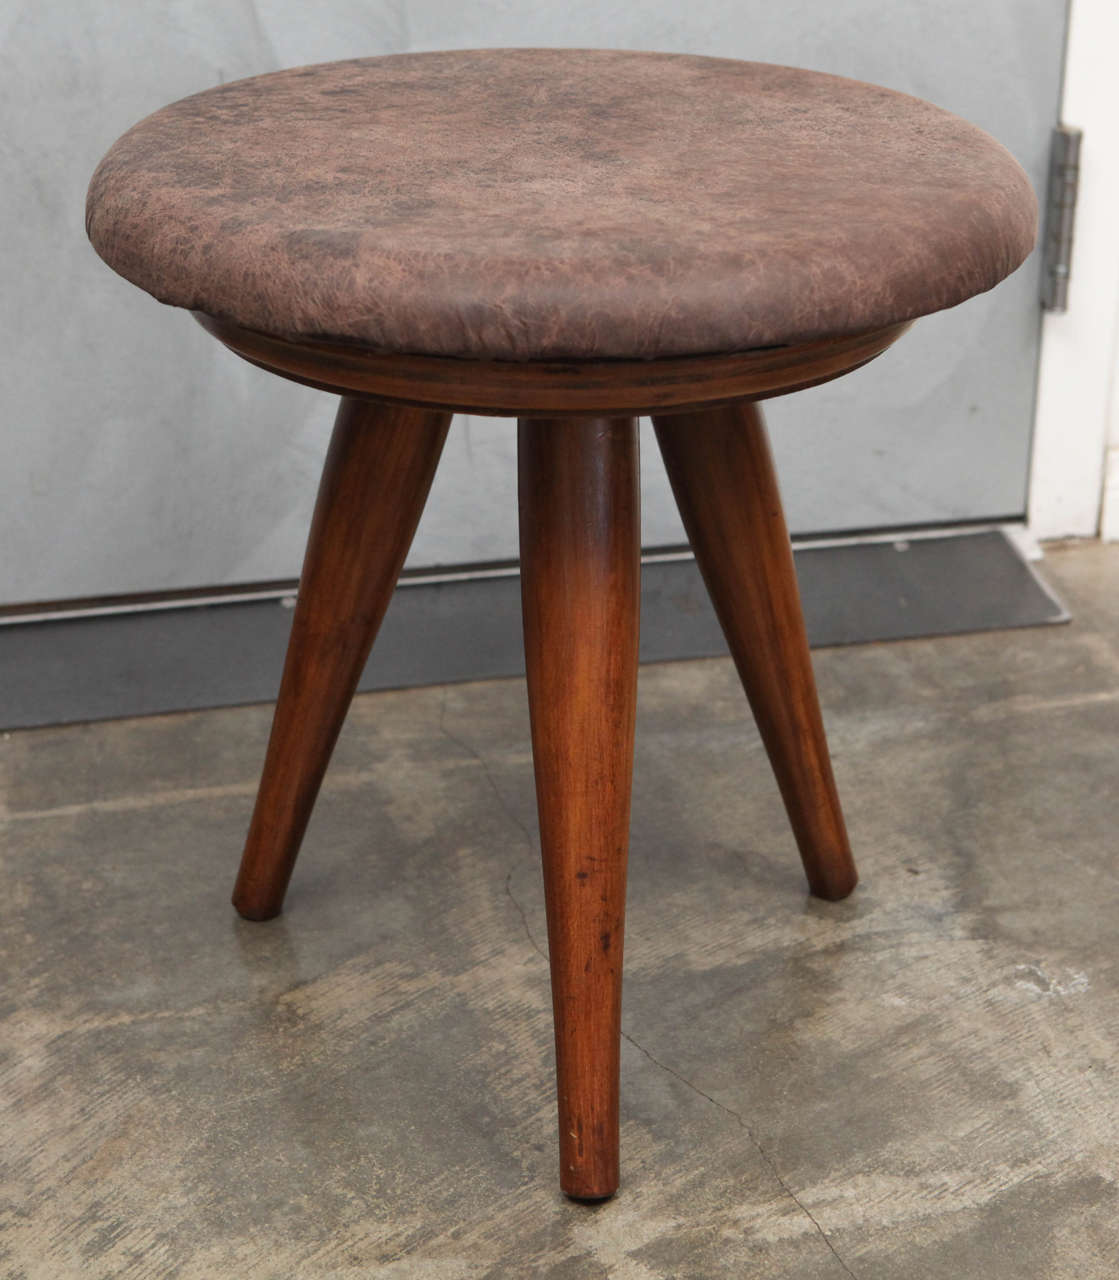 This great little stool is a great example of 1960's design with the Tapered Tripod legs, nice simple design lines. We have used a great soft, distressed brown leather to upholster the swiveling seat to make it a unique piece for a variety of themes